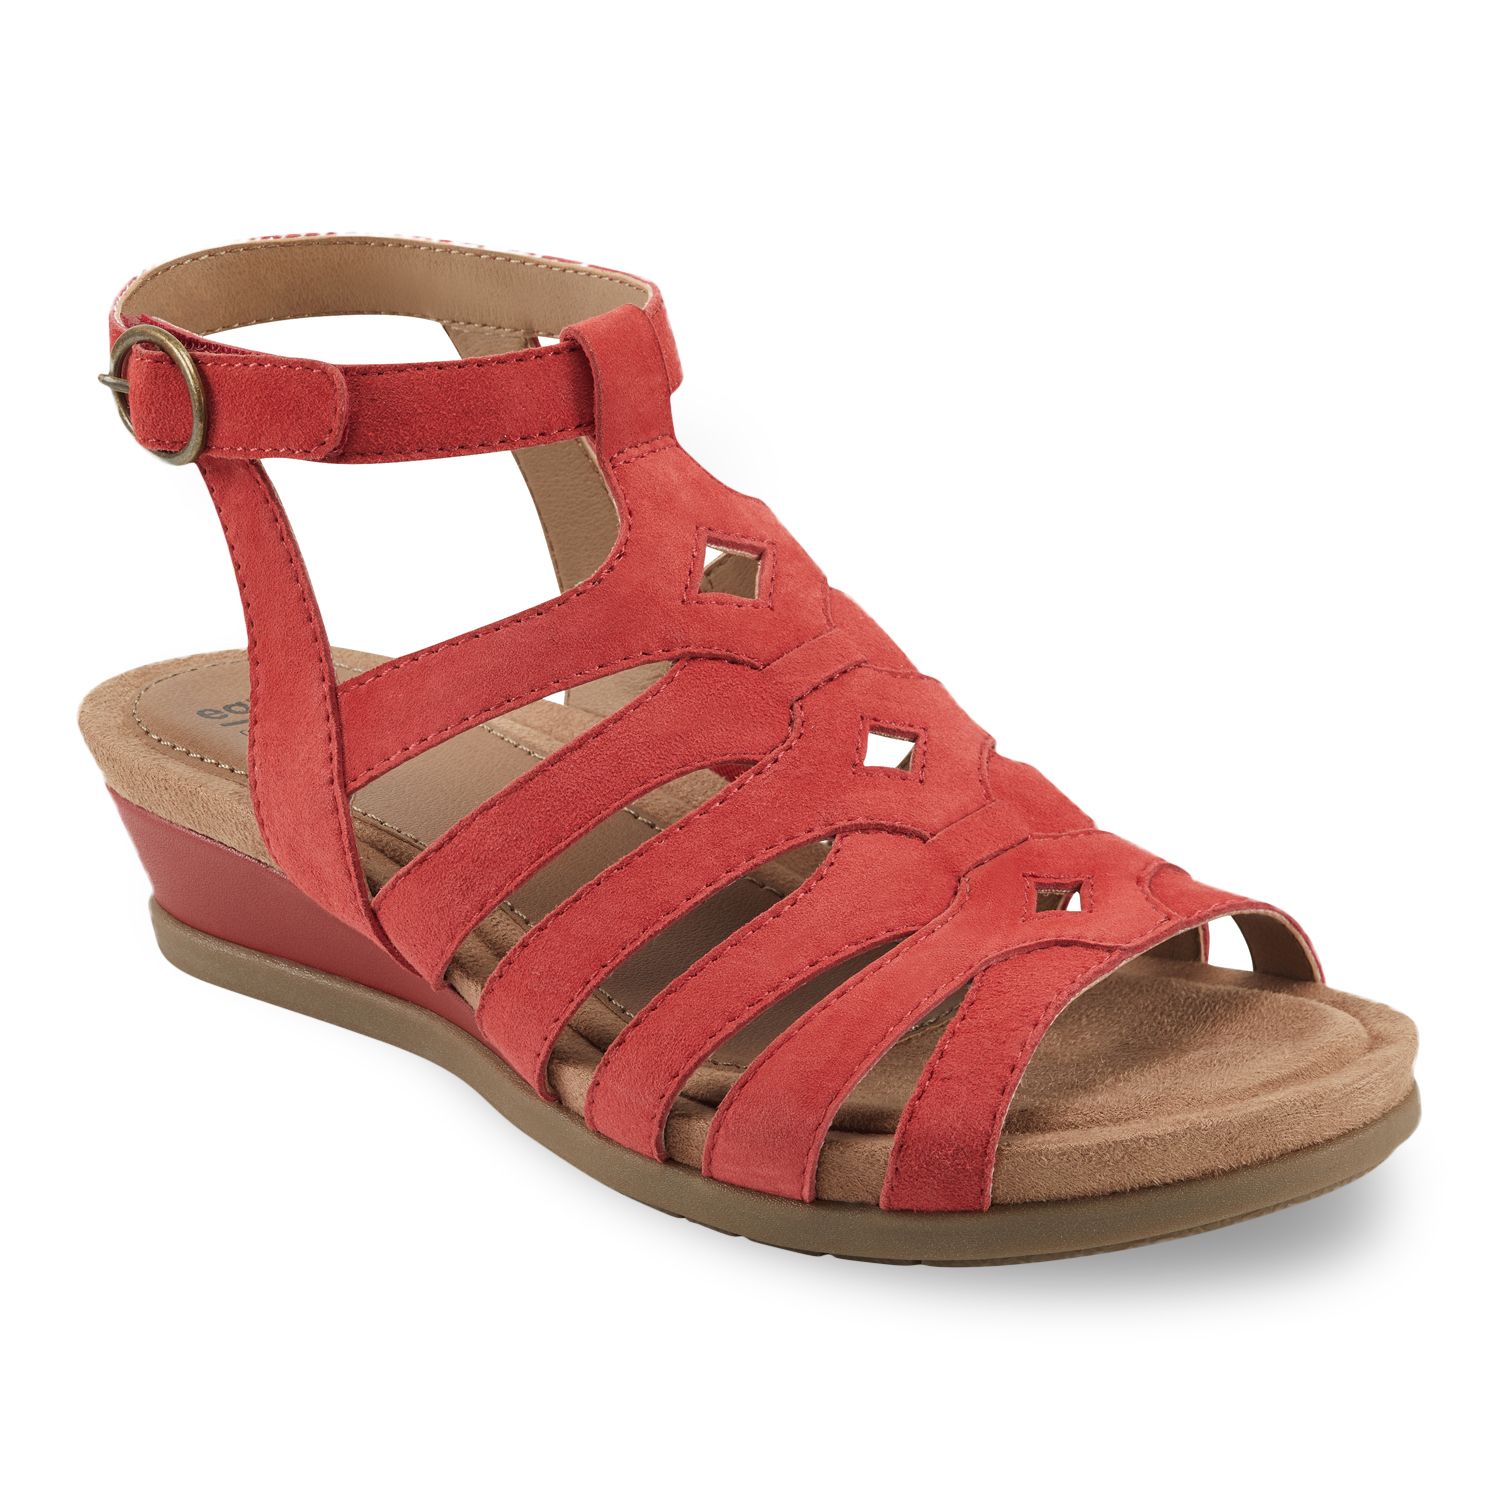 Image for Earth Origins Pippa Women's Suede Wedge Sandals at Kohl's.